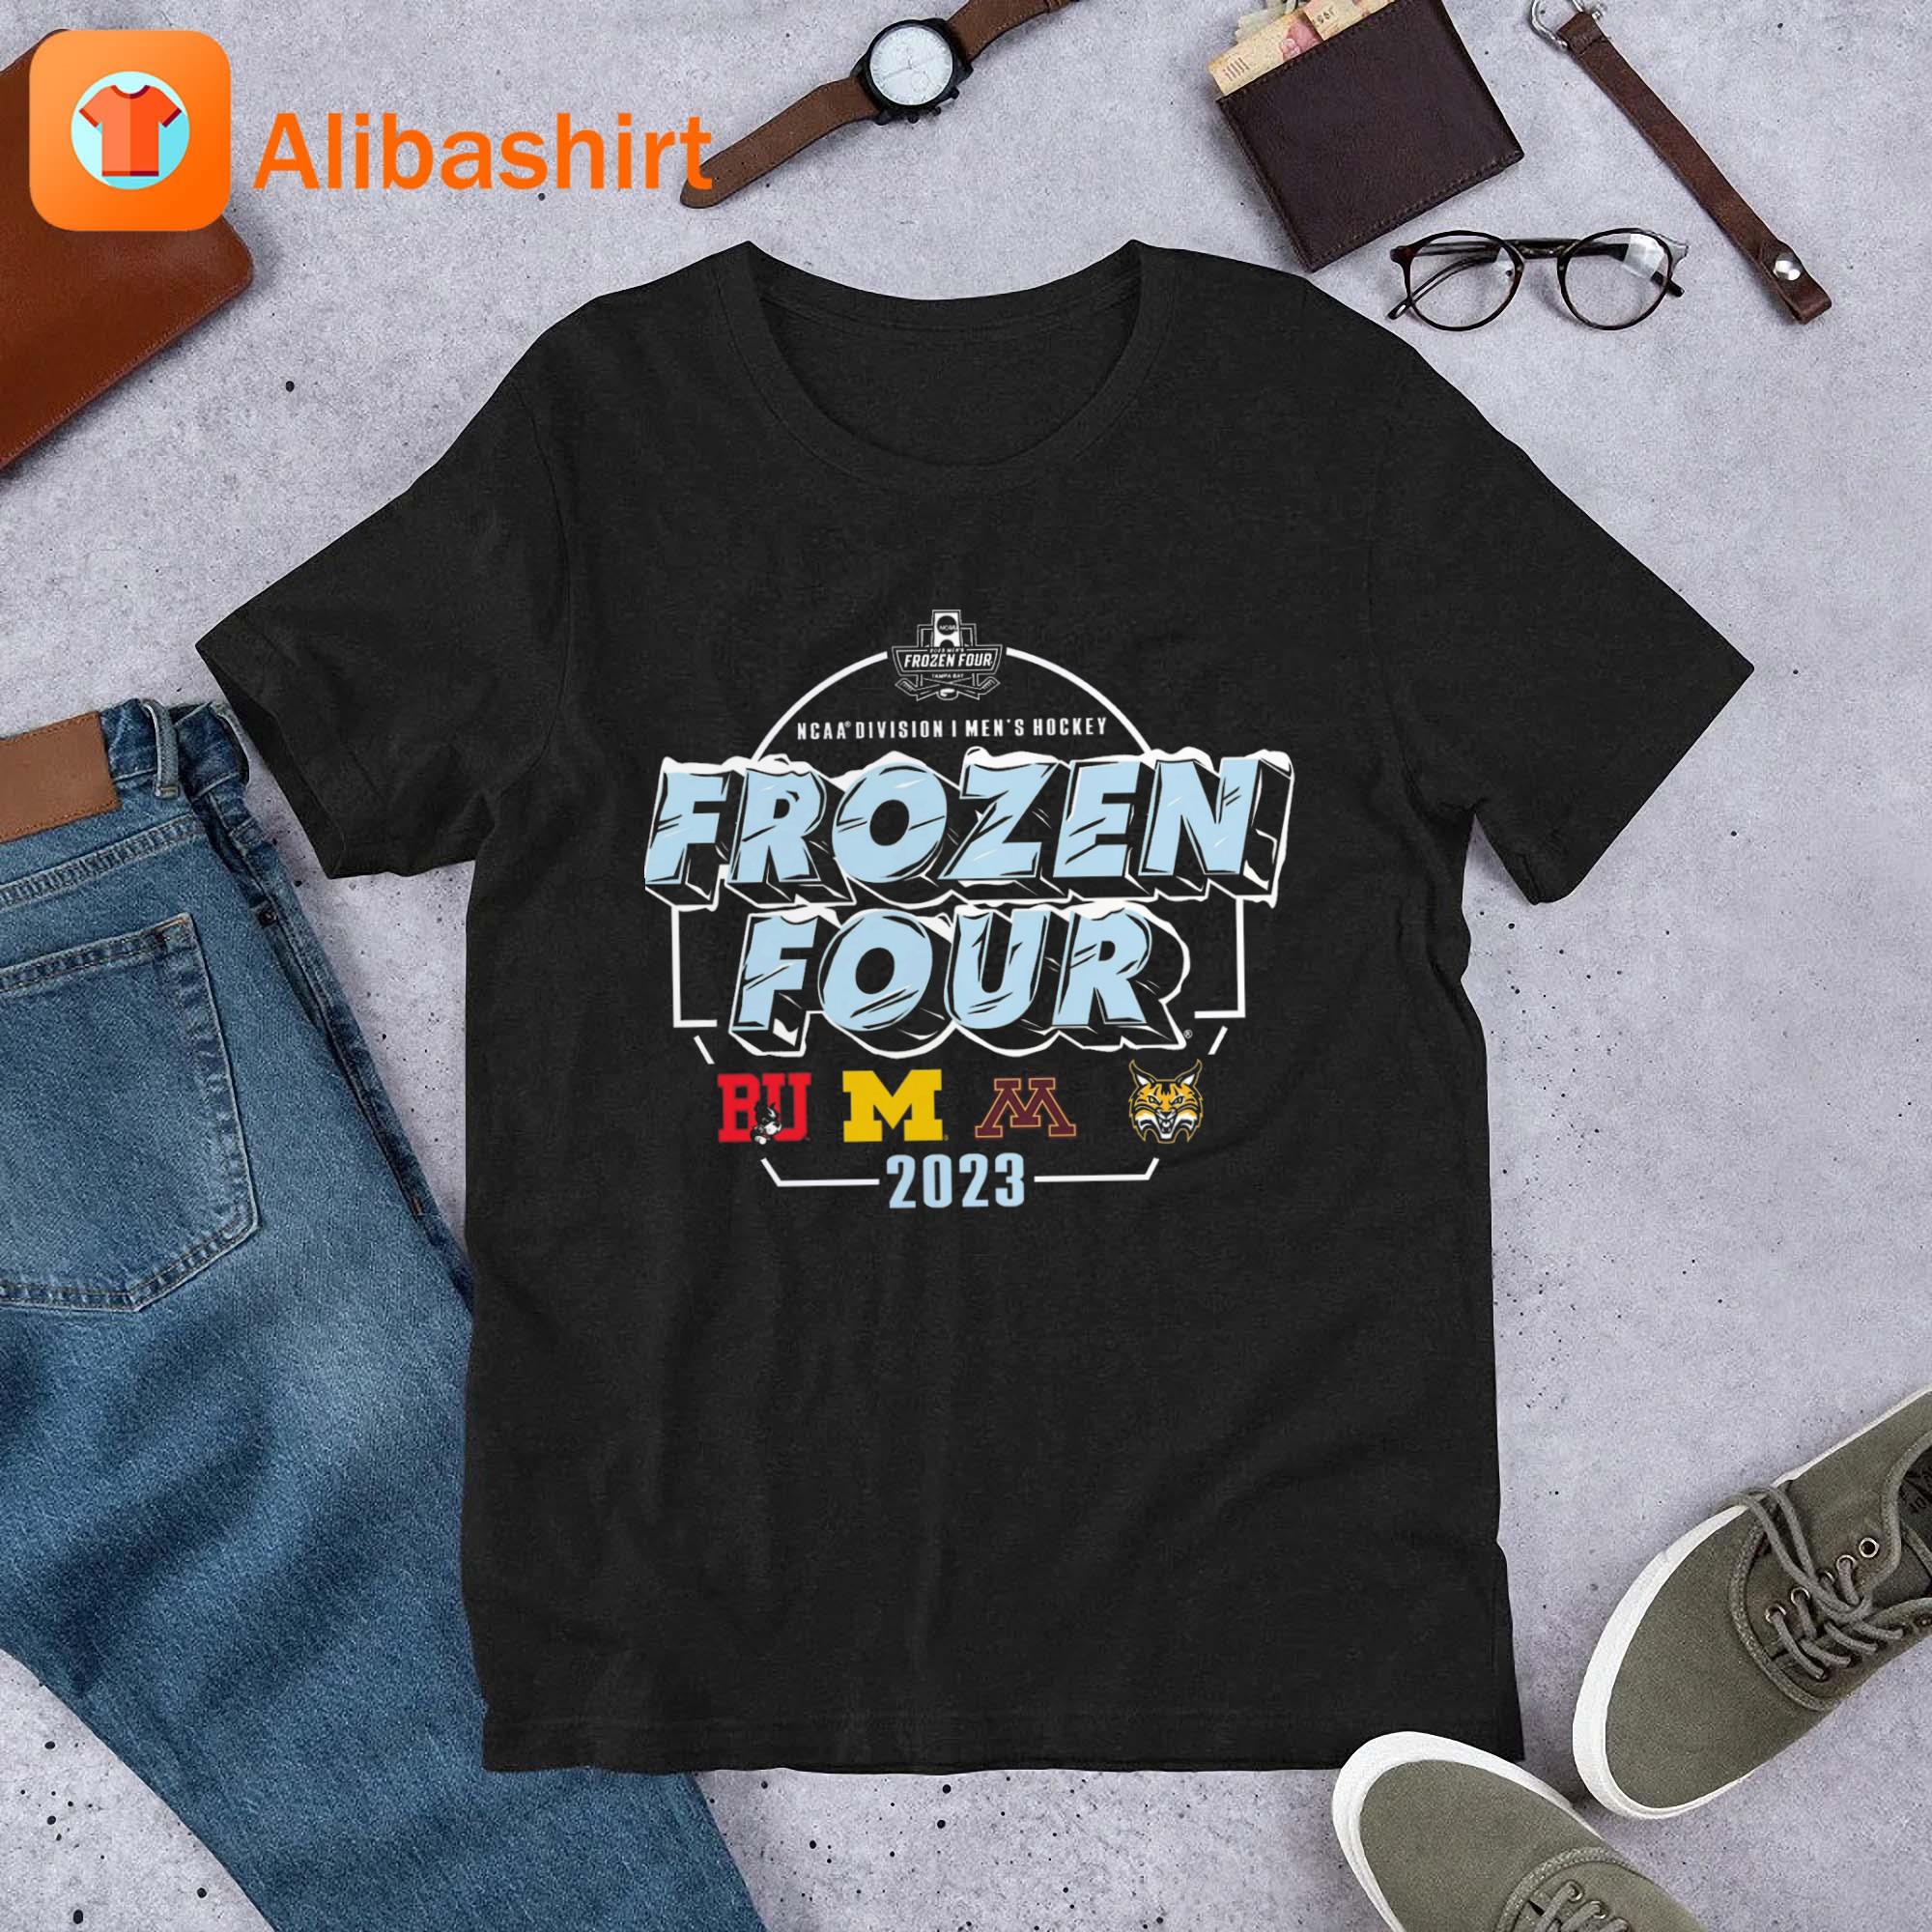 2023 NCAA Division I Frozen Four Men's Ice Hockey Tournament National Champions shirt